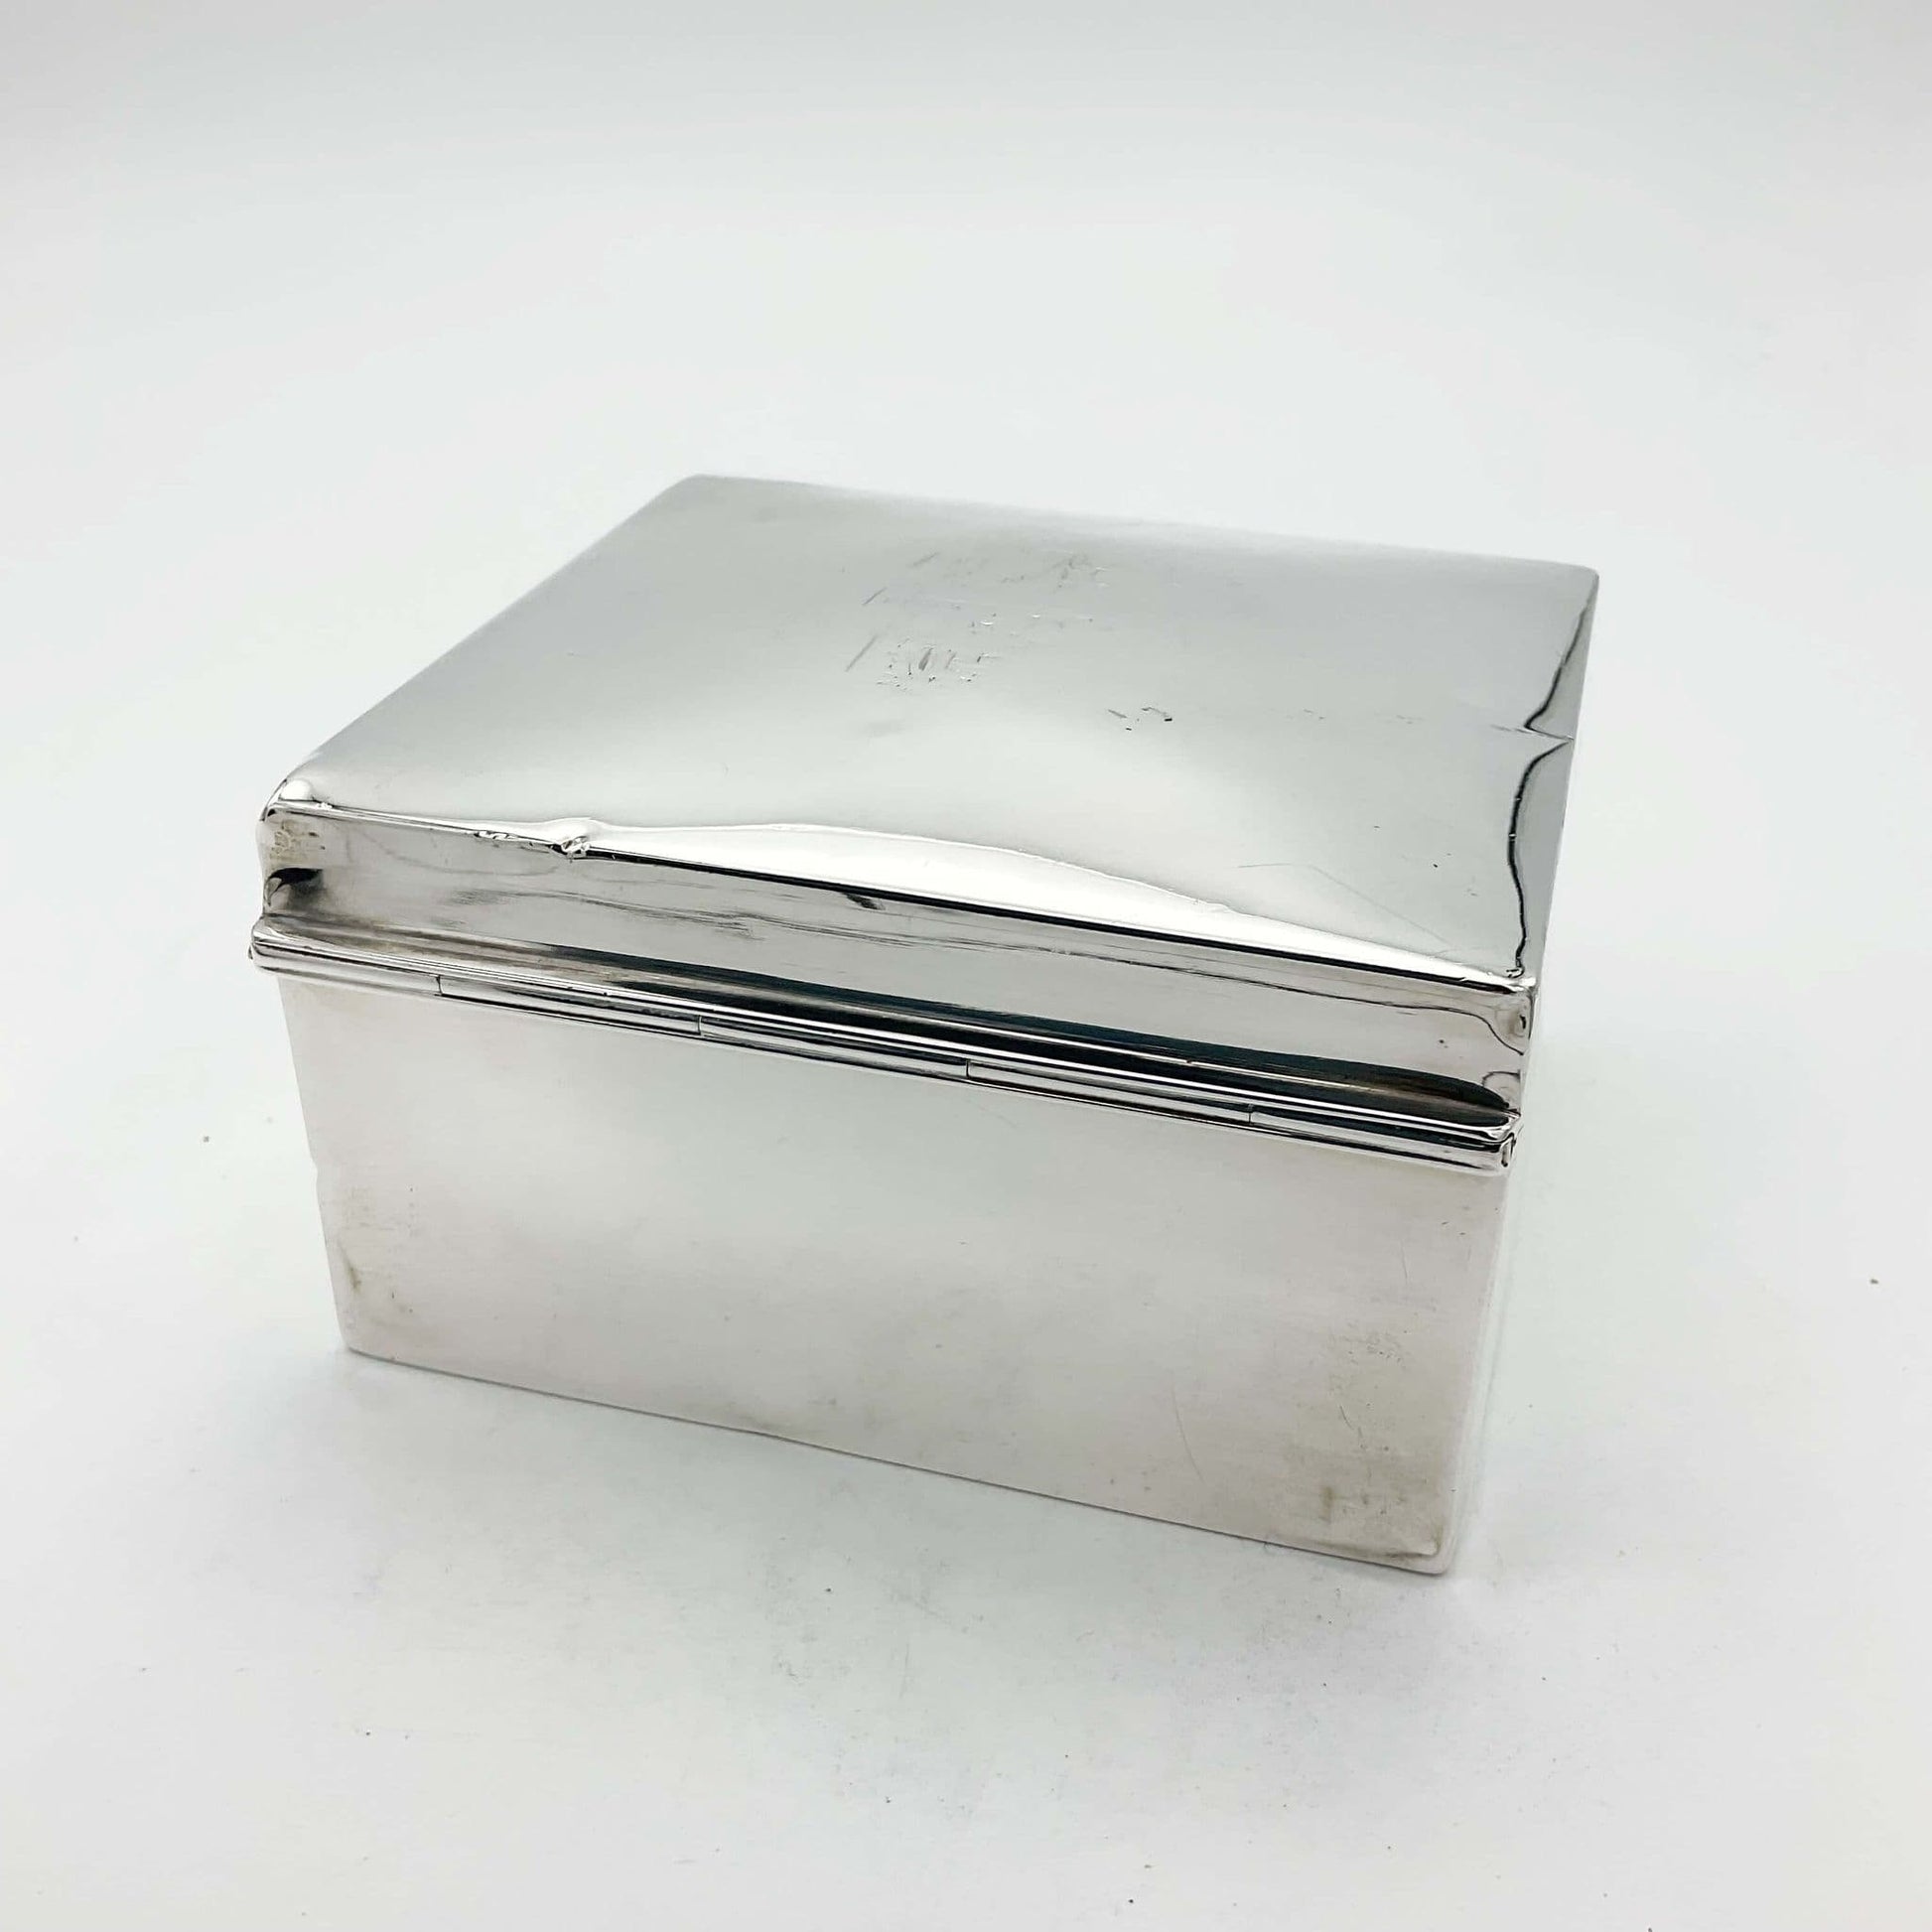 Back view showing the hinge of the Antique Sterling Silver Cigarette Box